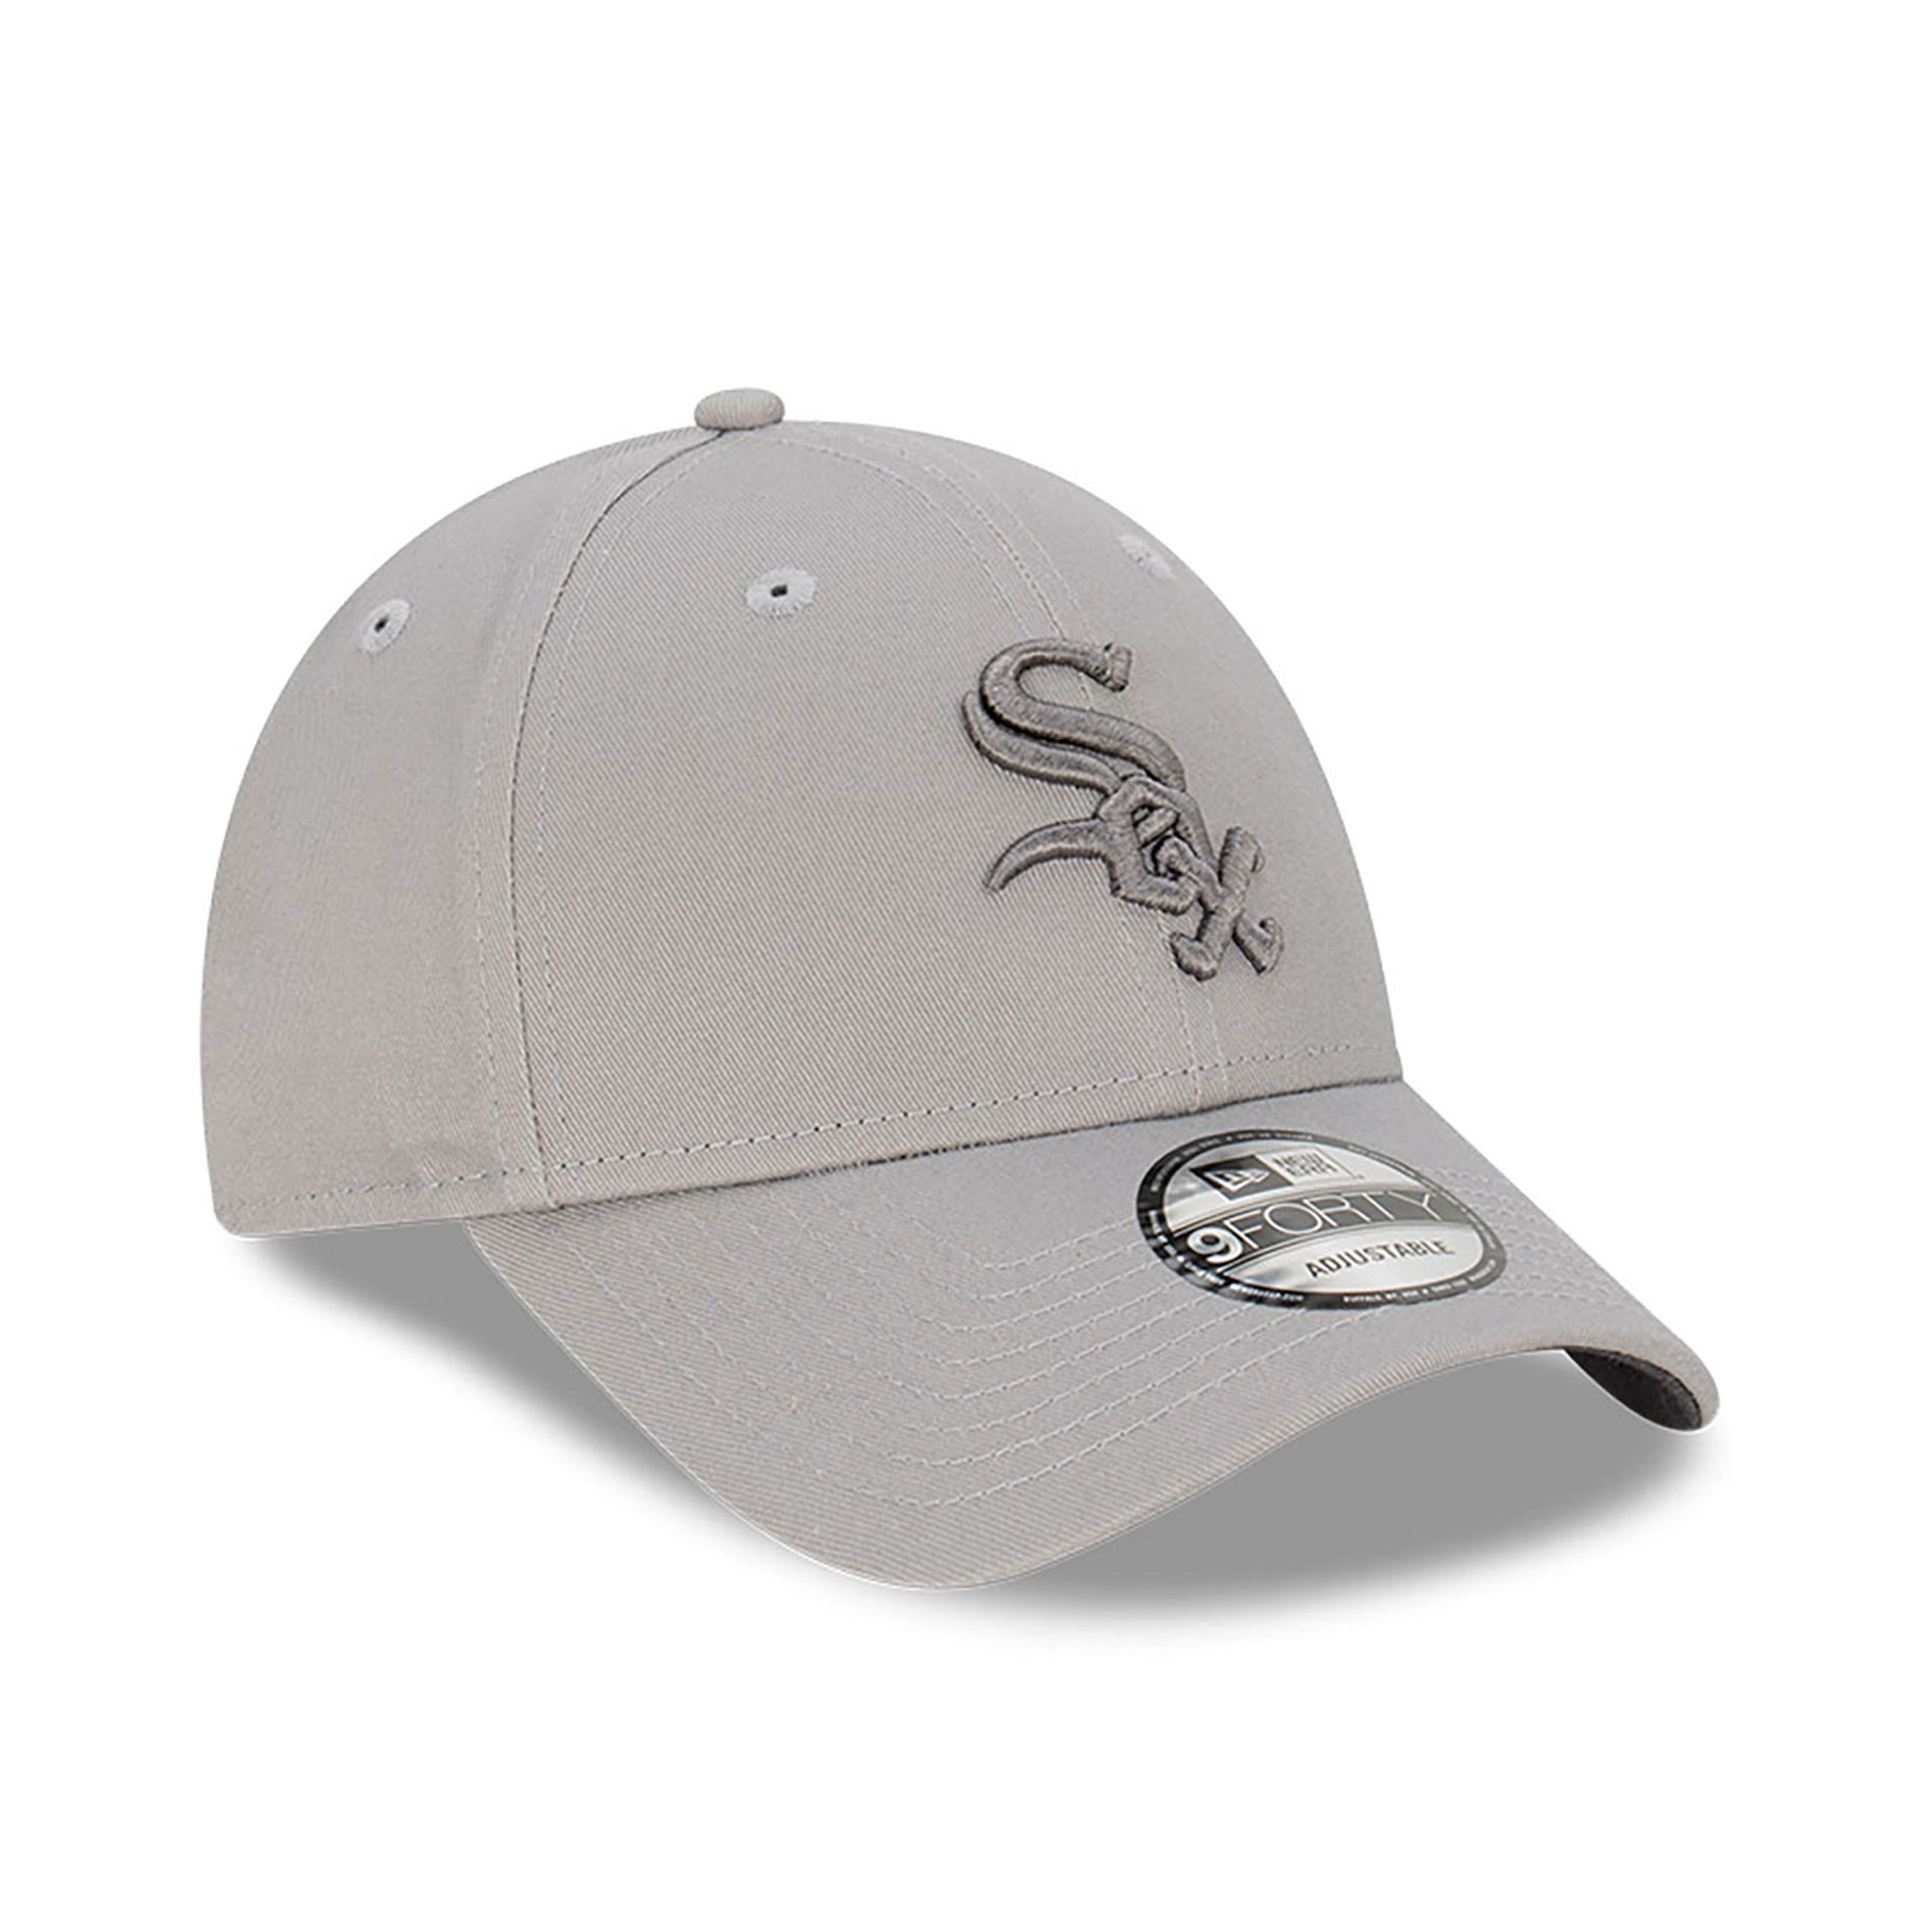 Chicago White Sox Moon Dust Grey 9FORTY Adjustable Cap